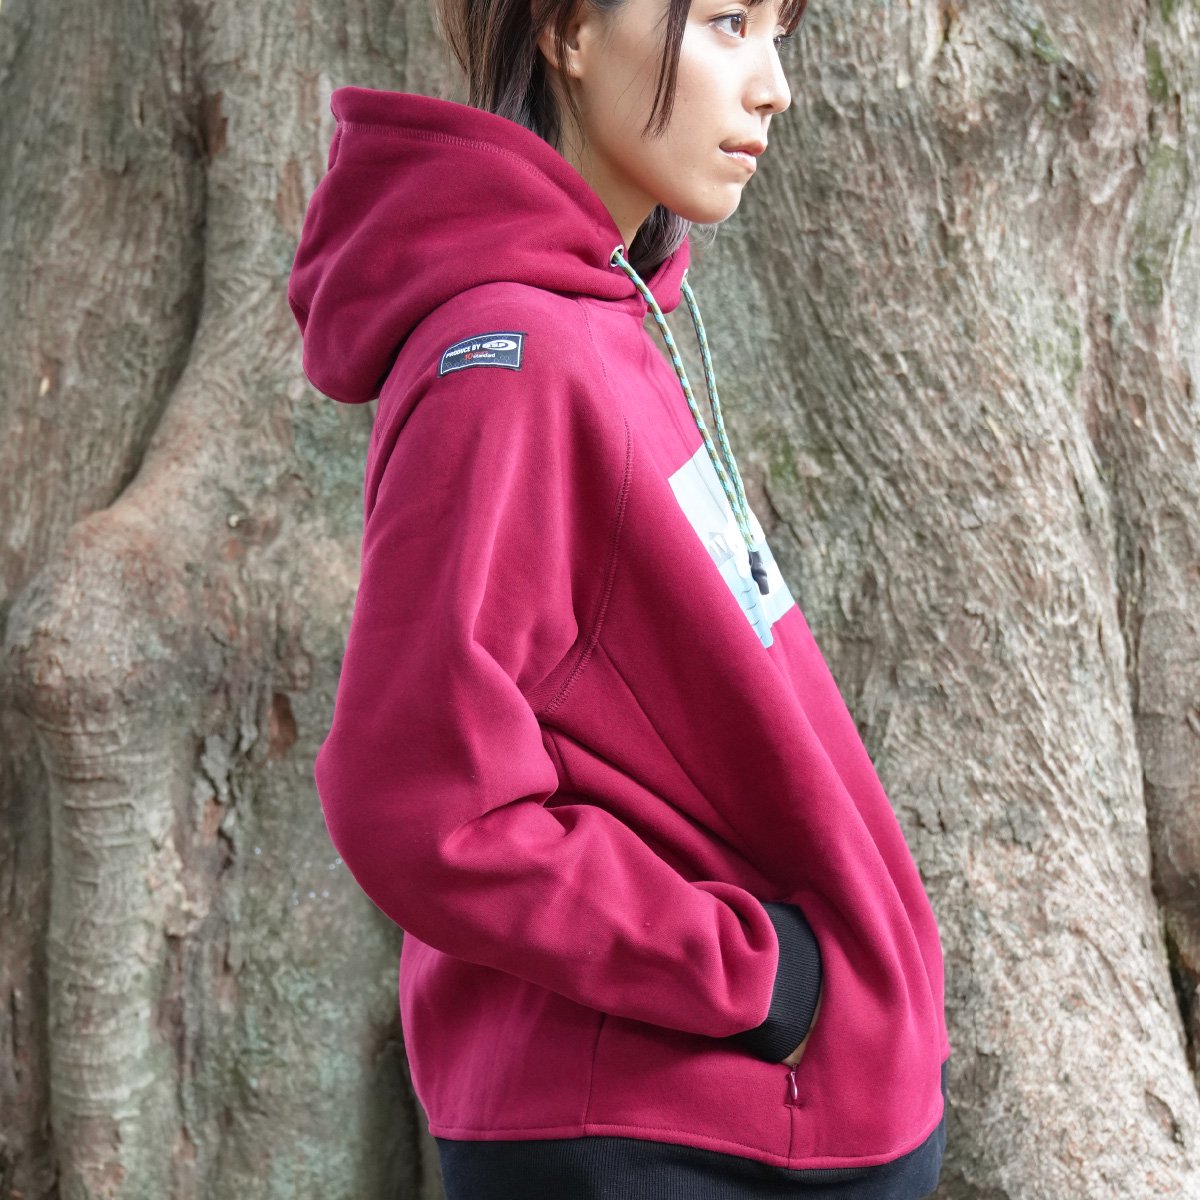 <img class='new_mark_img1' src='https://img.shop-pro.jp/img/new/icons20.gif' style='border:none;display:inline;margin:0px;padding:0px;width:auto;' />3A Pullover hoodie